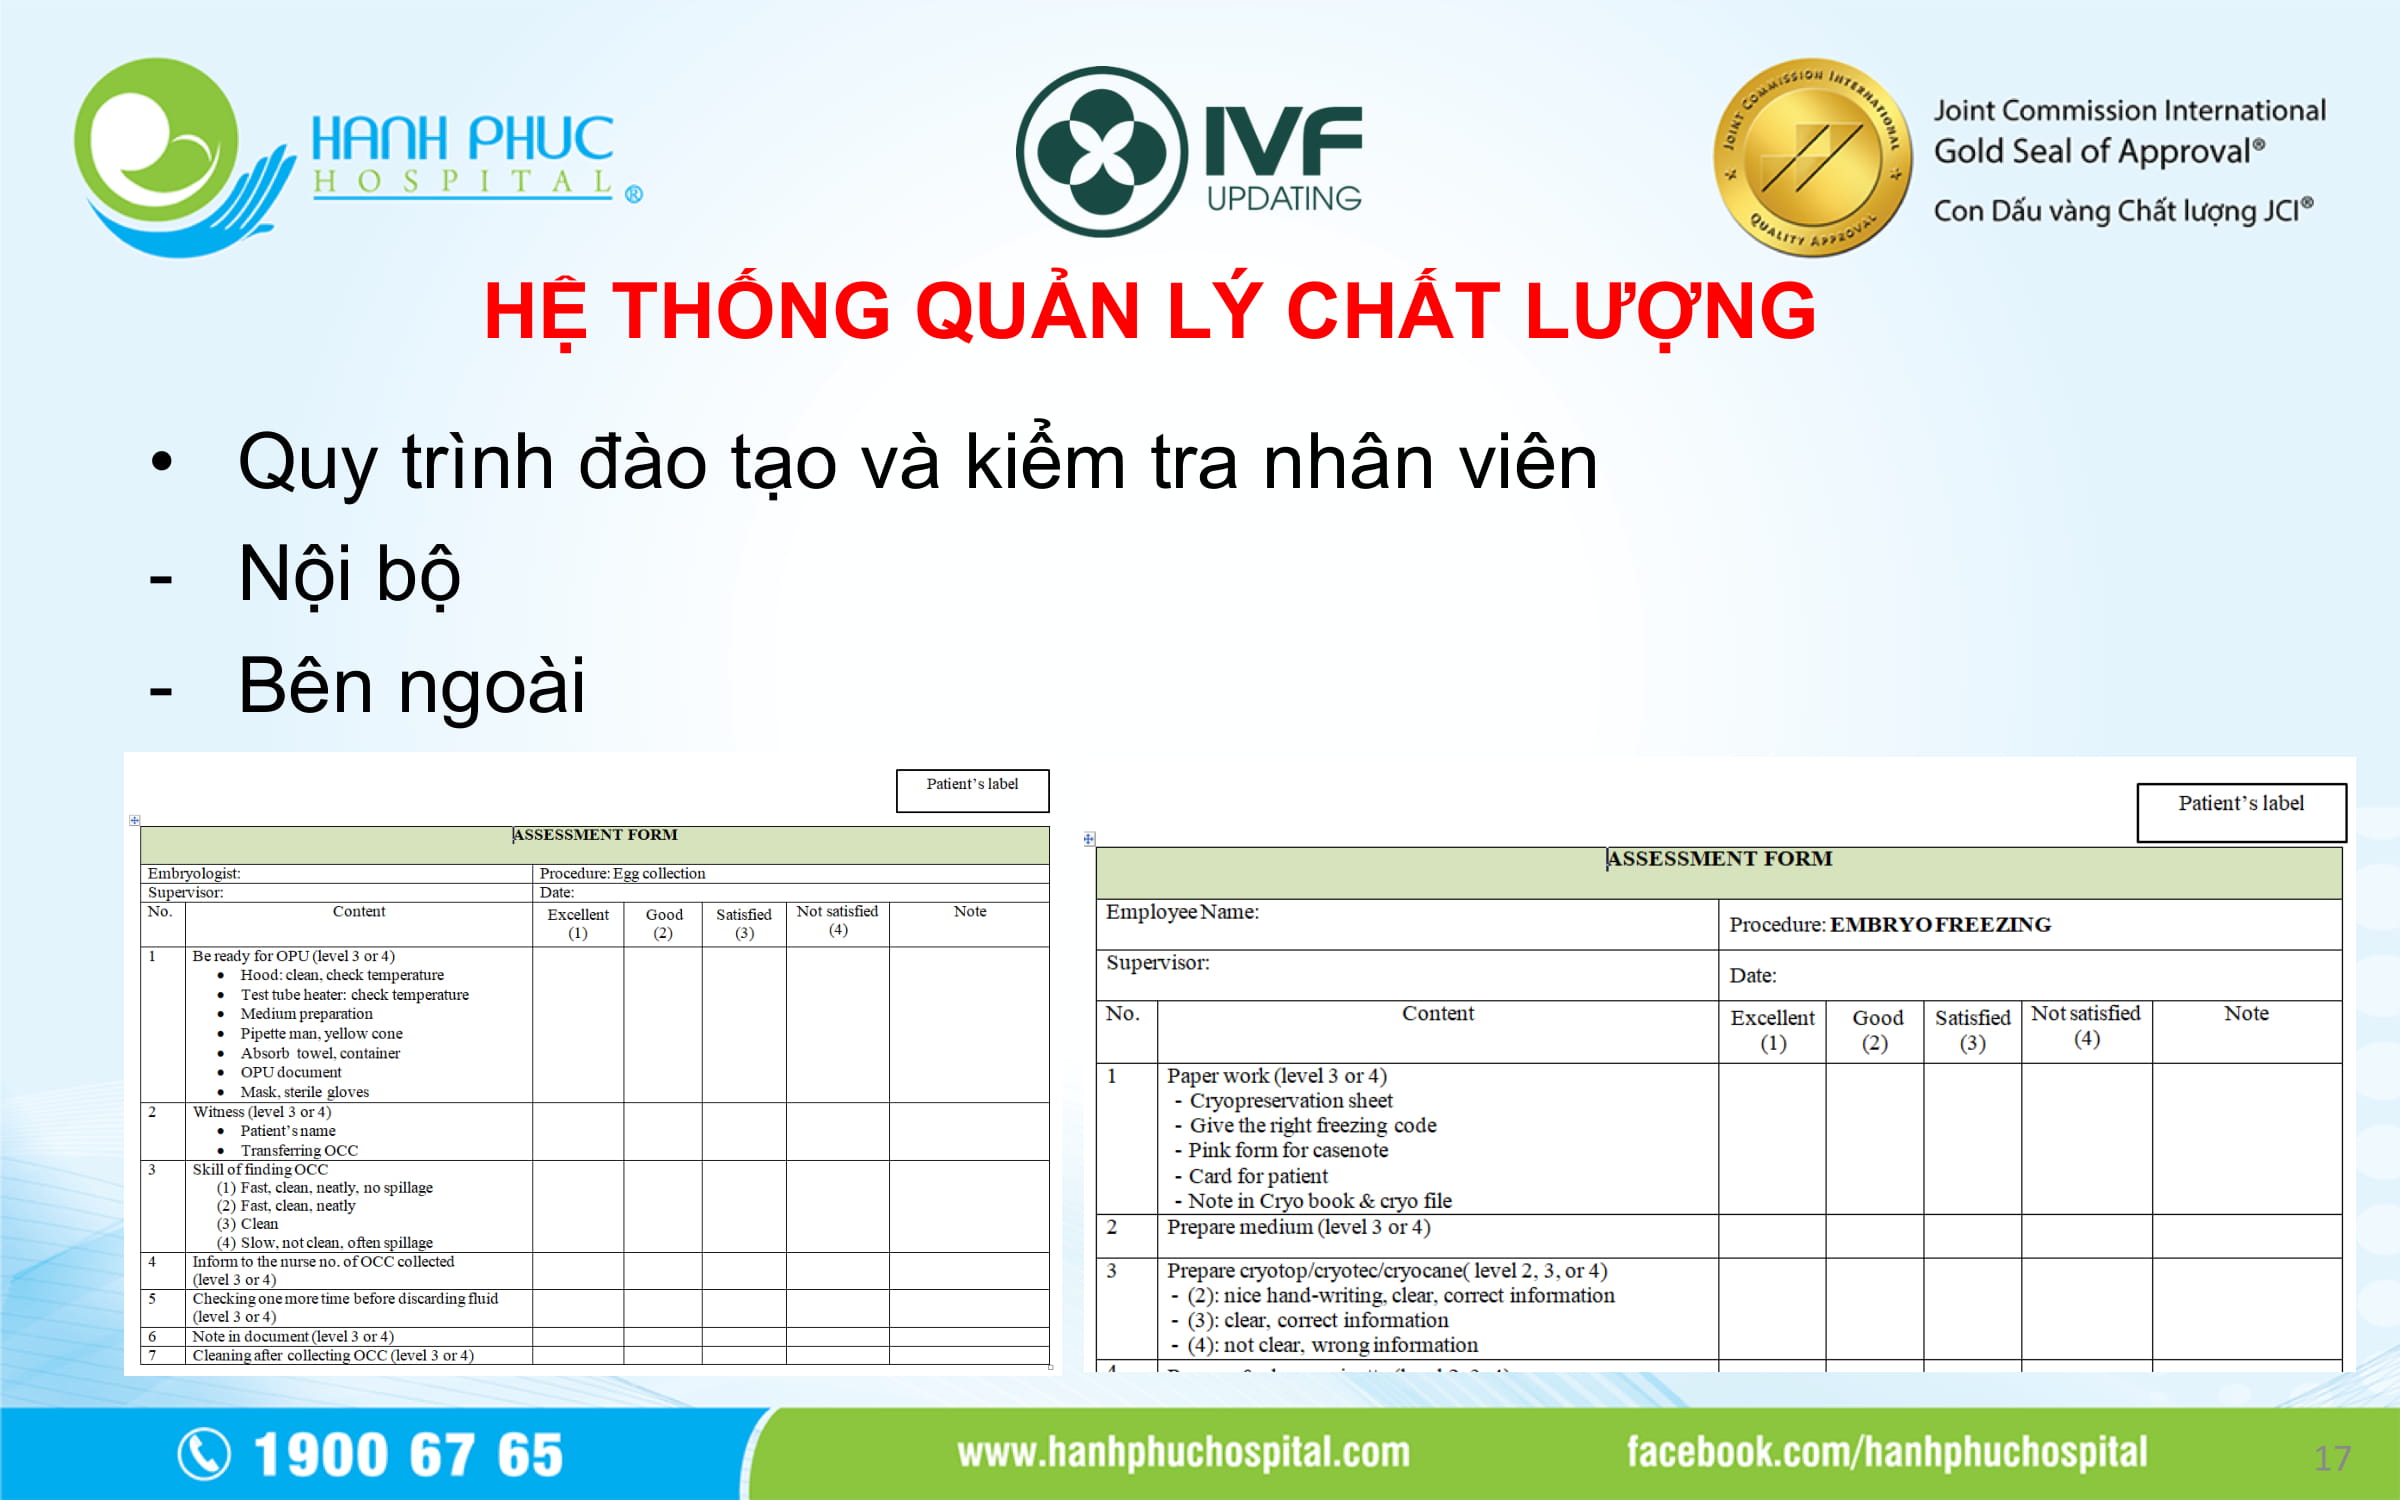 BS Vo Thien An Report_IVF UPDATING 5-17